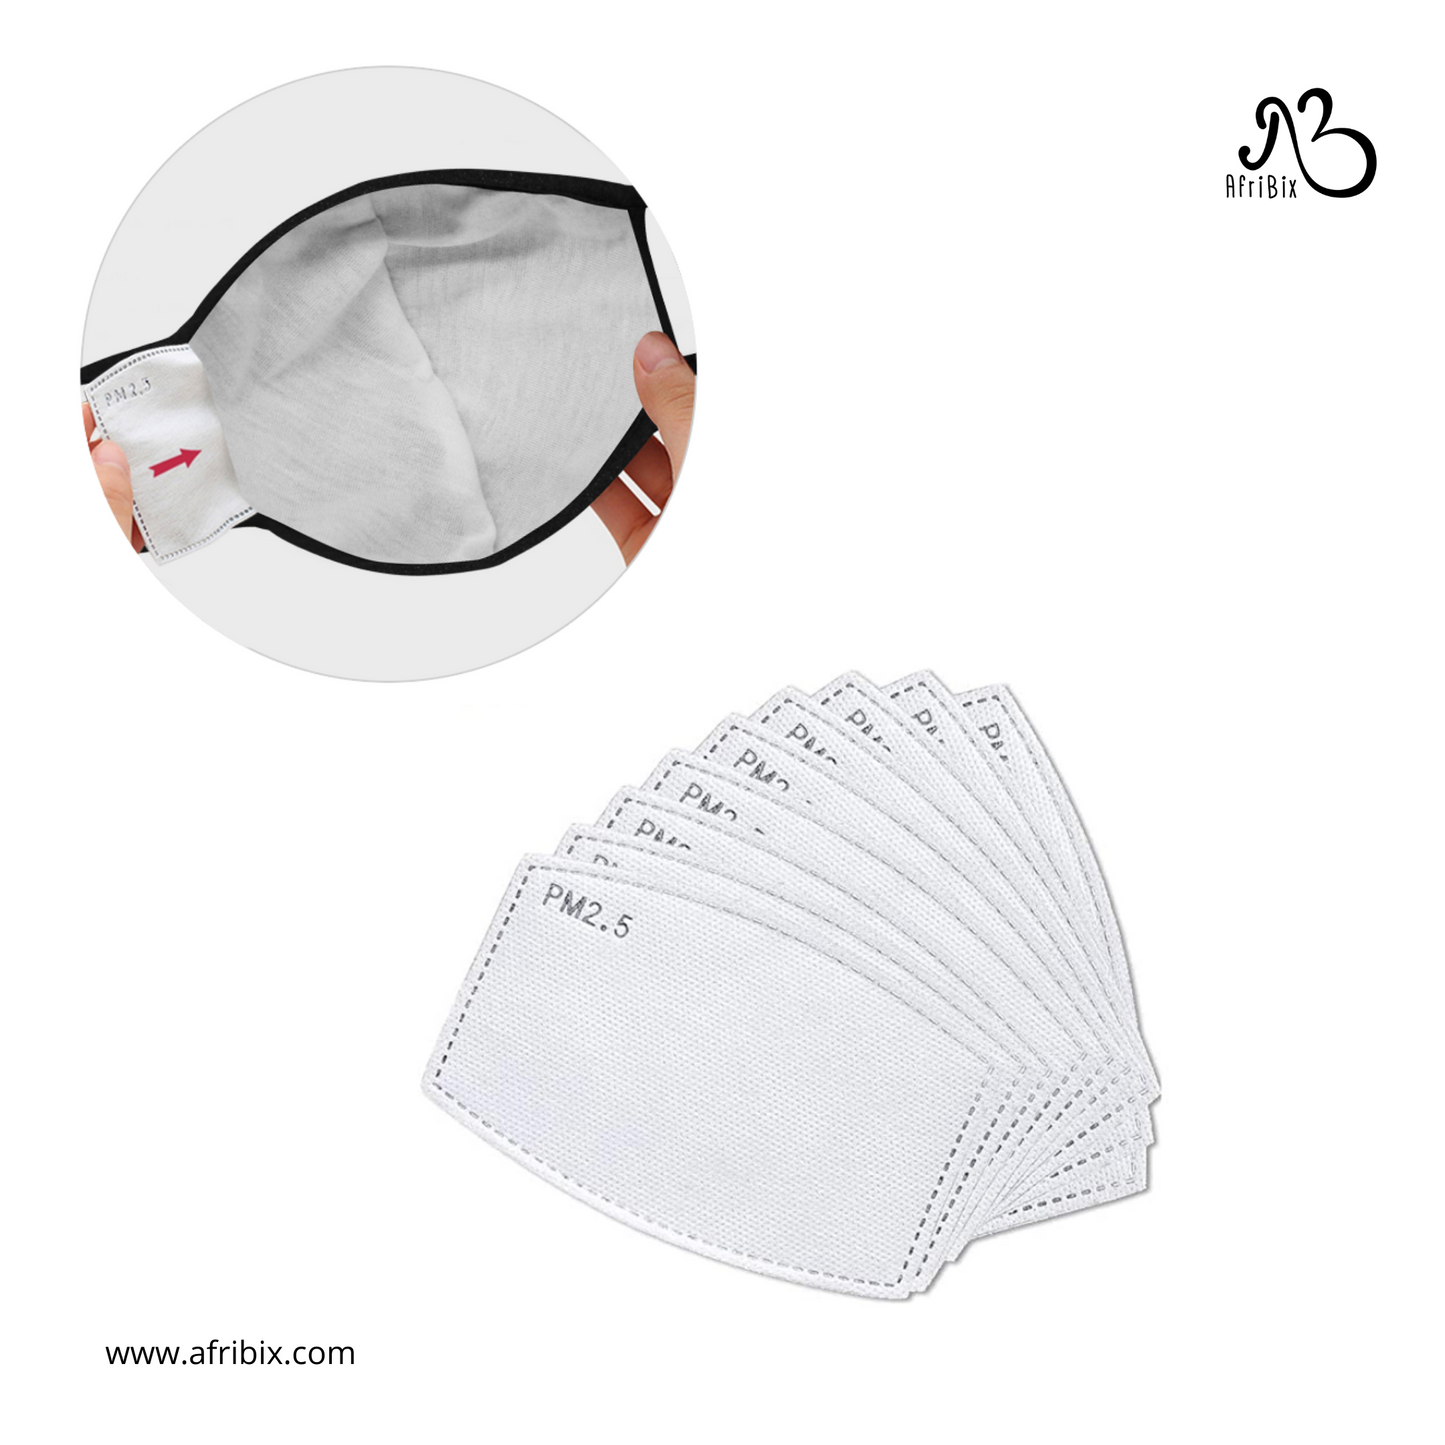 Pack of 10 Replaceable PM2.5 Activated Carbon Filters for Cloth Face Masks - Non-medical use only